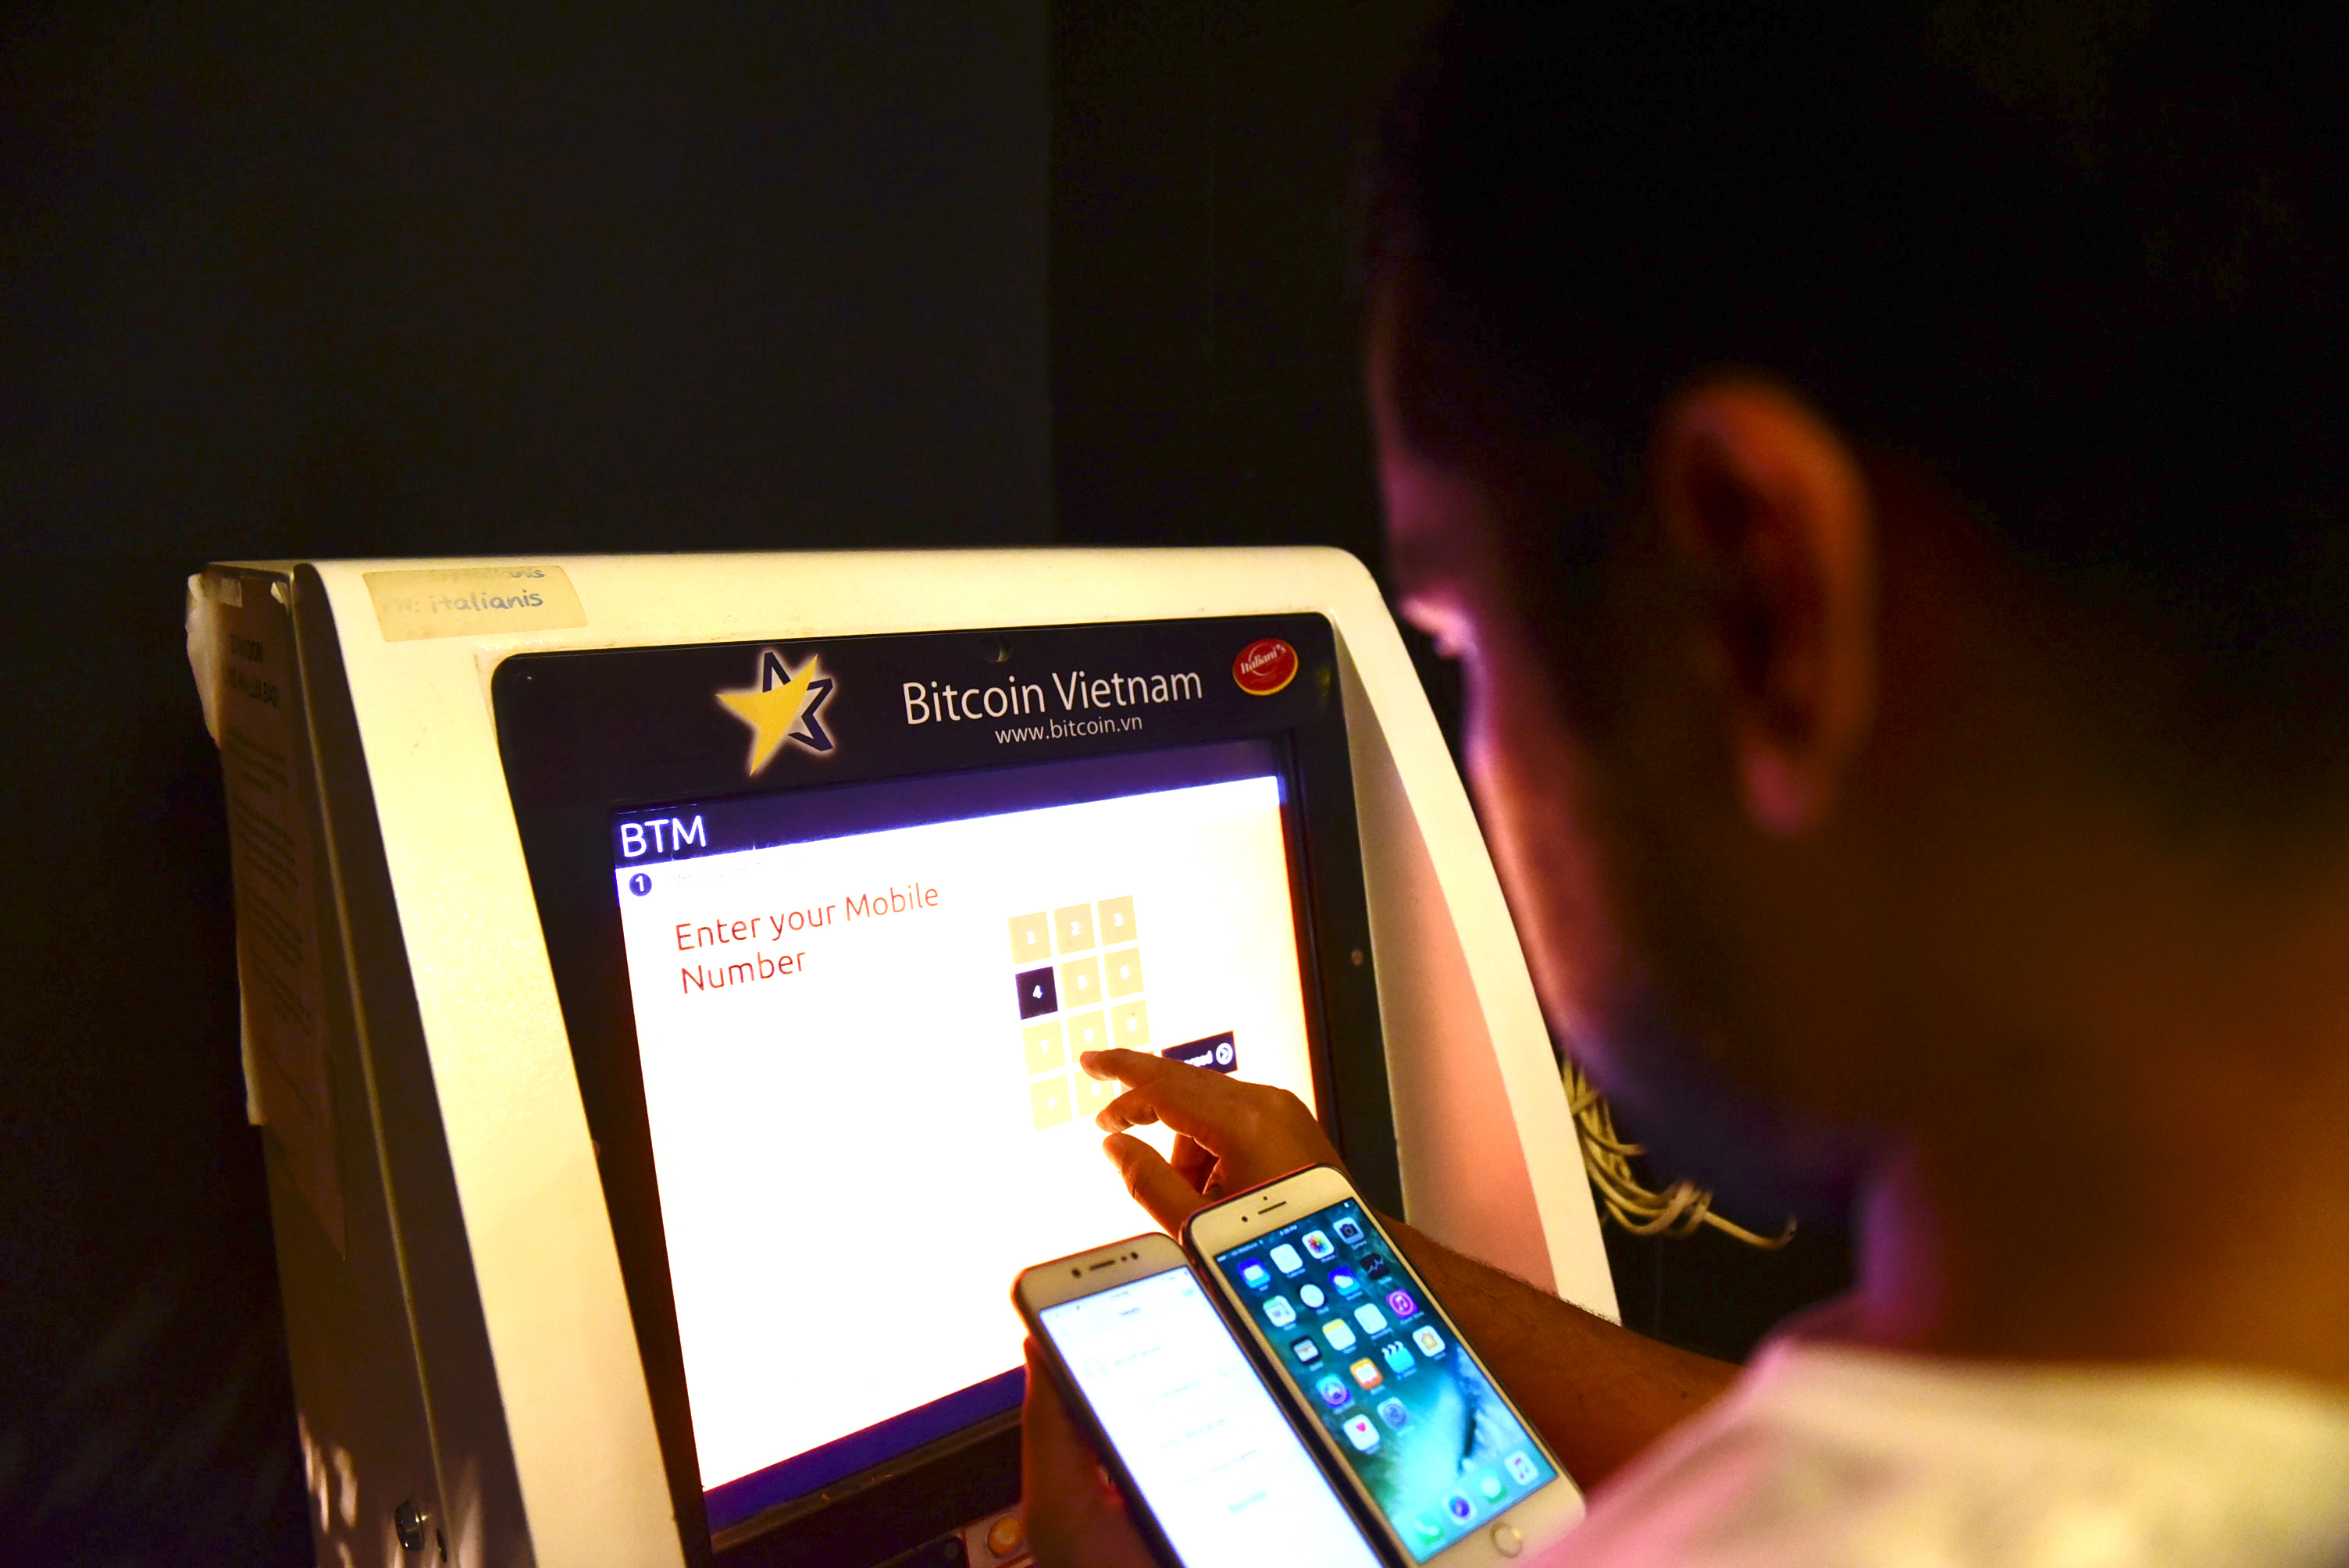 A man taps on the screen of a bitcoin ATM in Ho Chi Minh City. Photo: Tuoi Tre